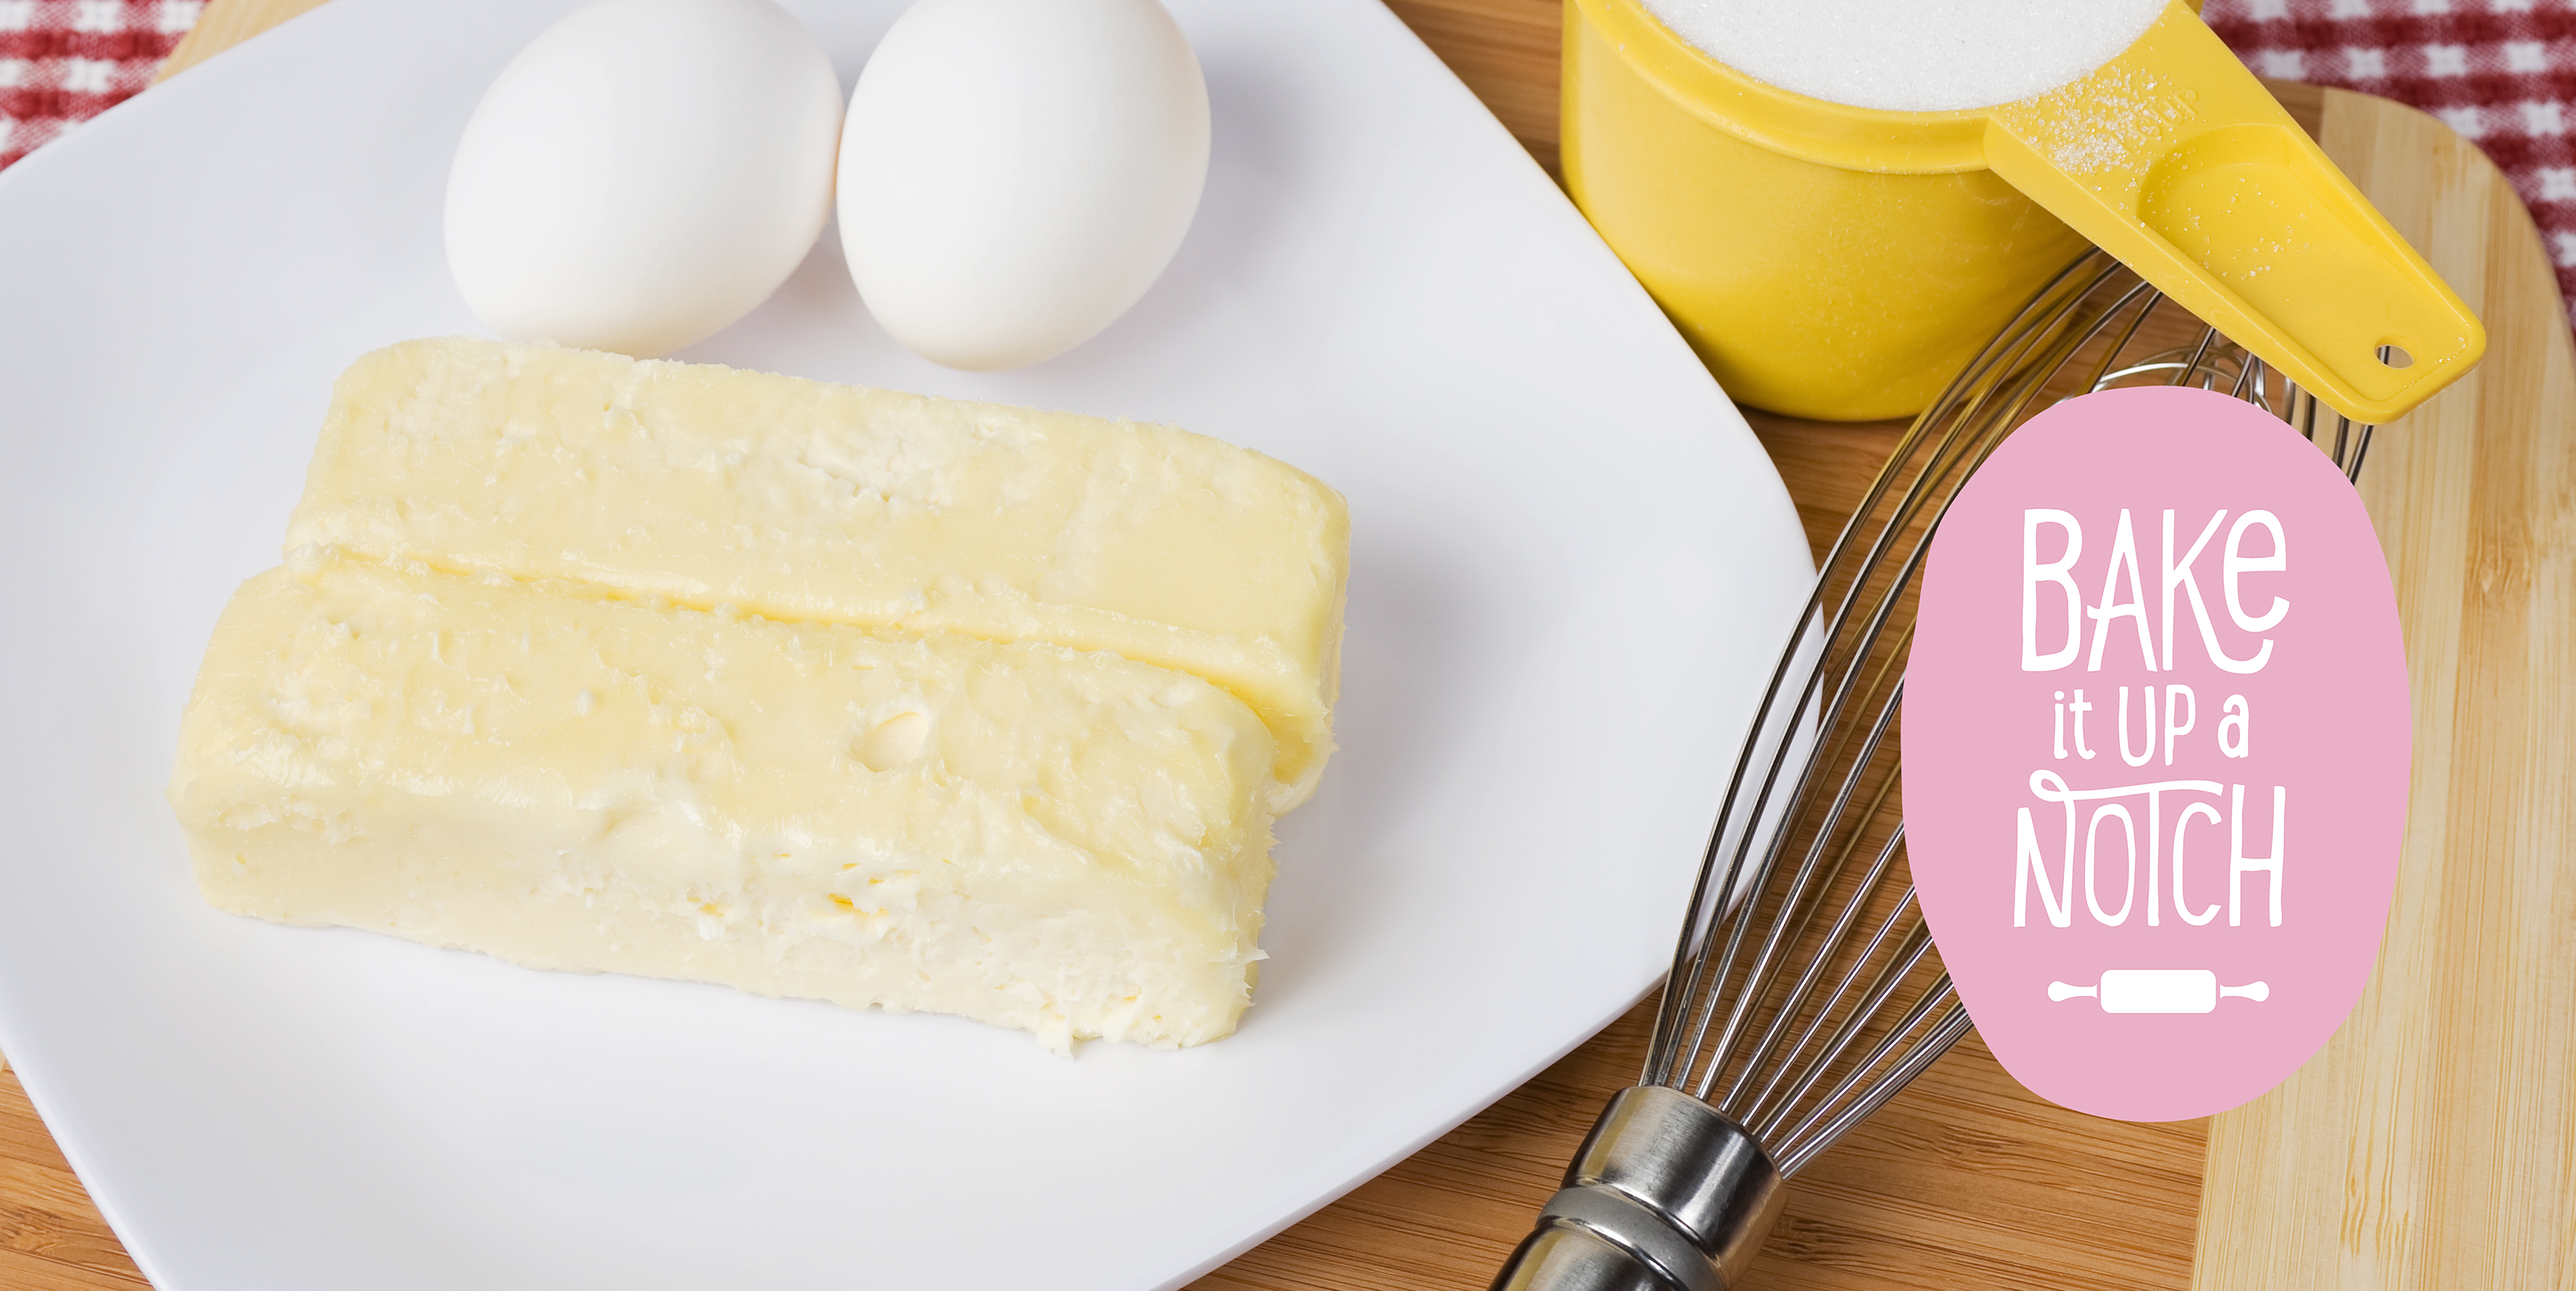 Kitchen Hack: How to Soften Butter in 10 Minutes - 2 Quick Ways